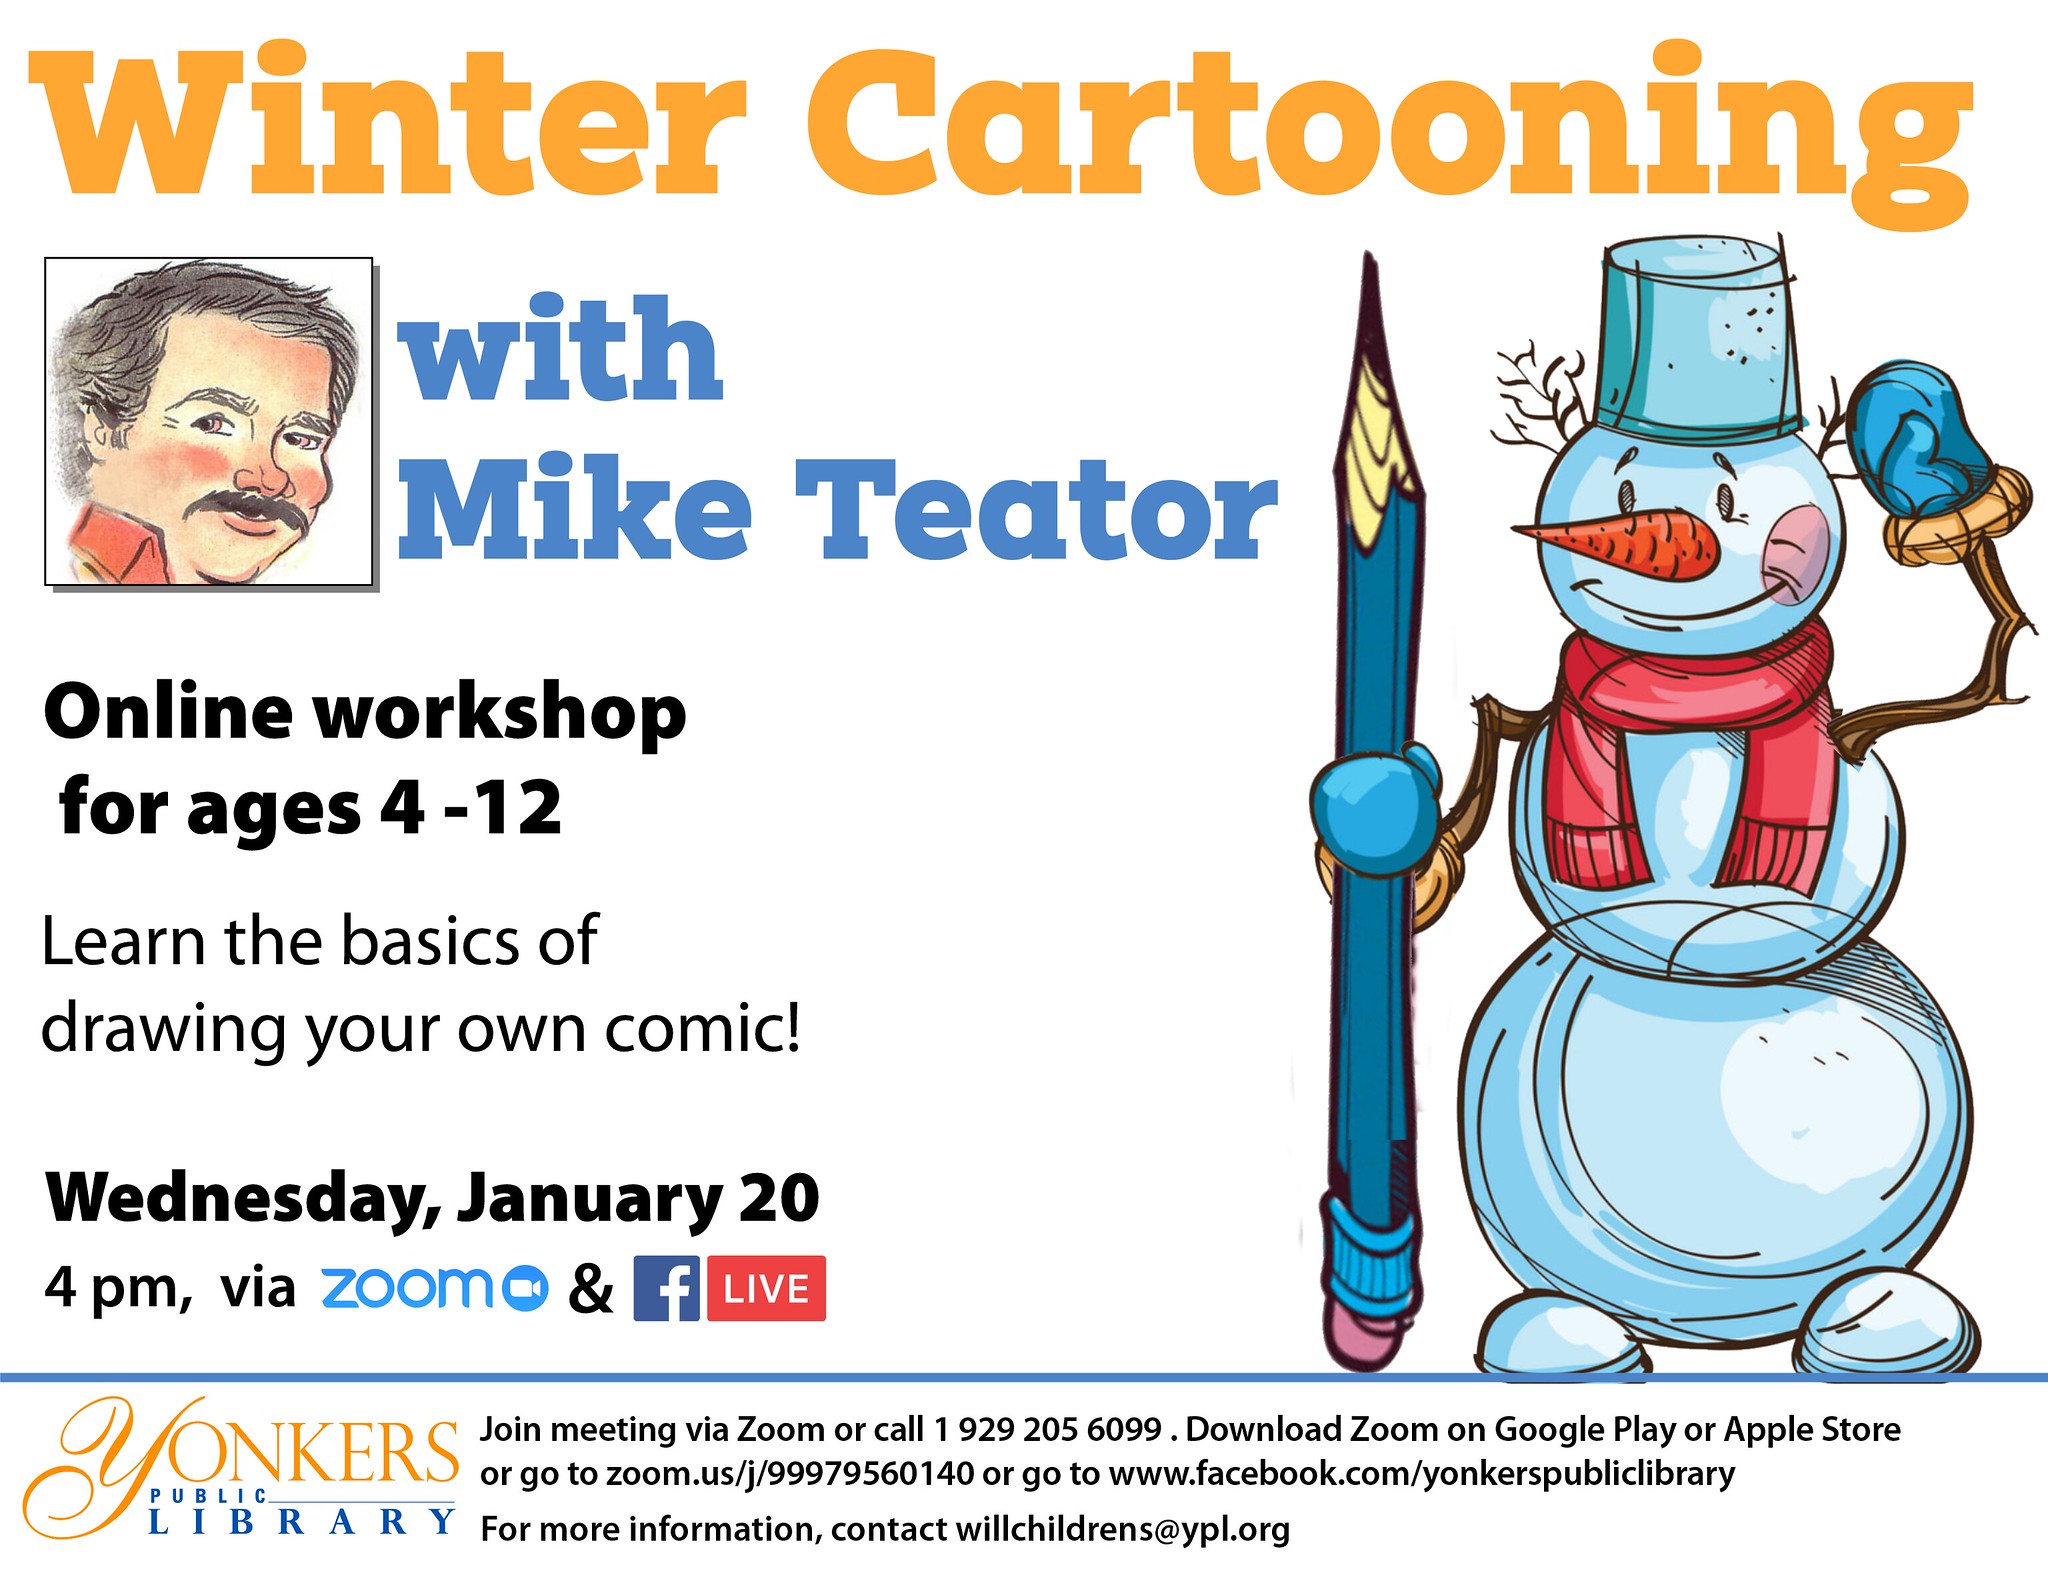 Winter Cartooning with Mike Teator image